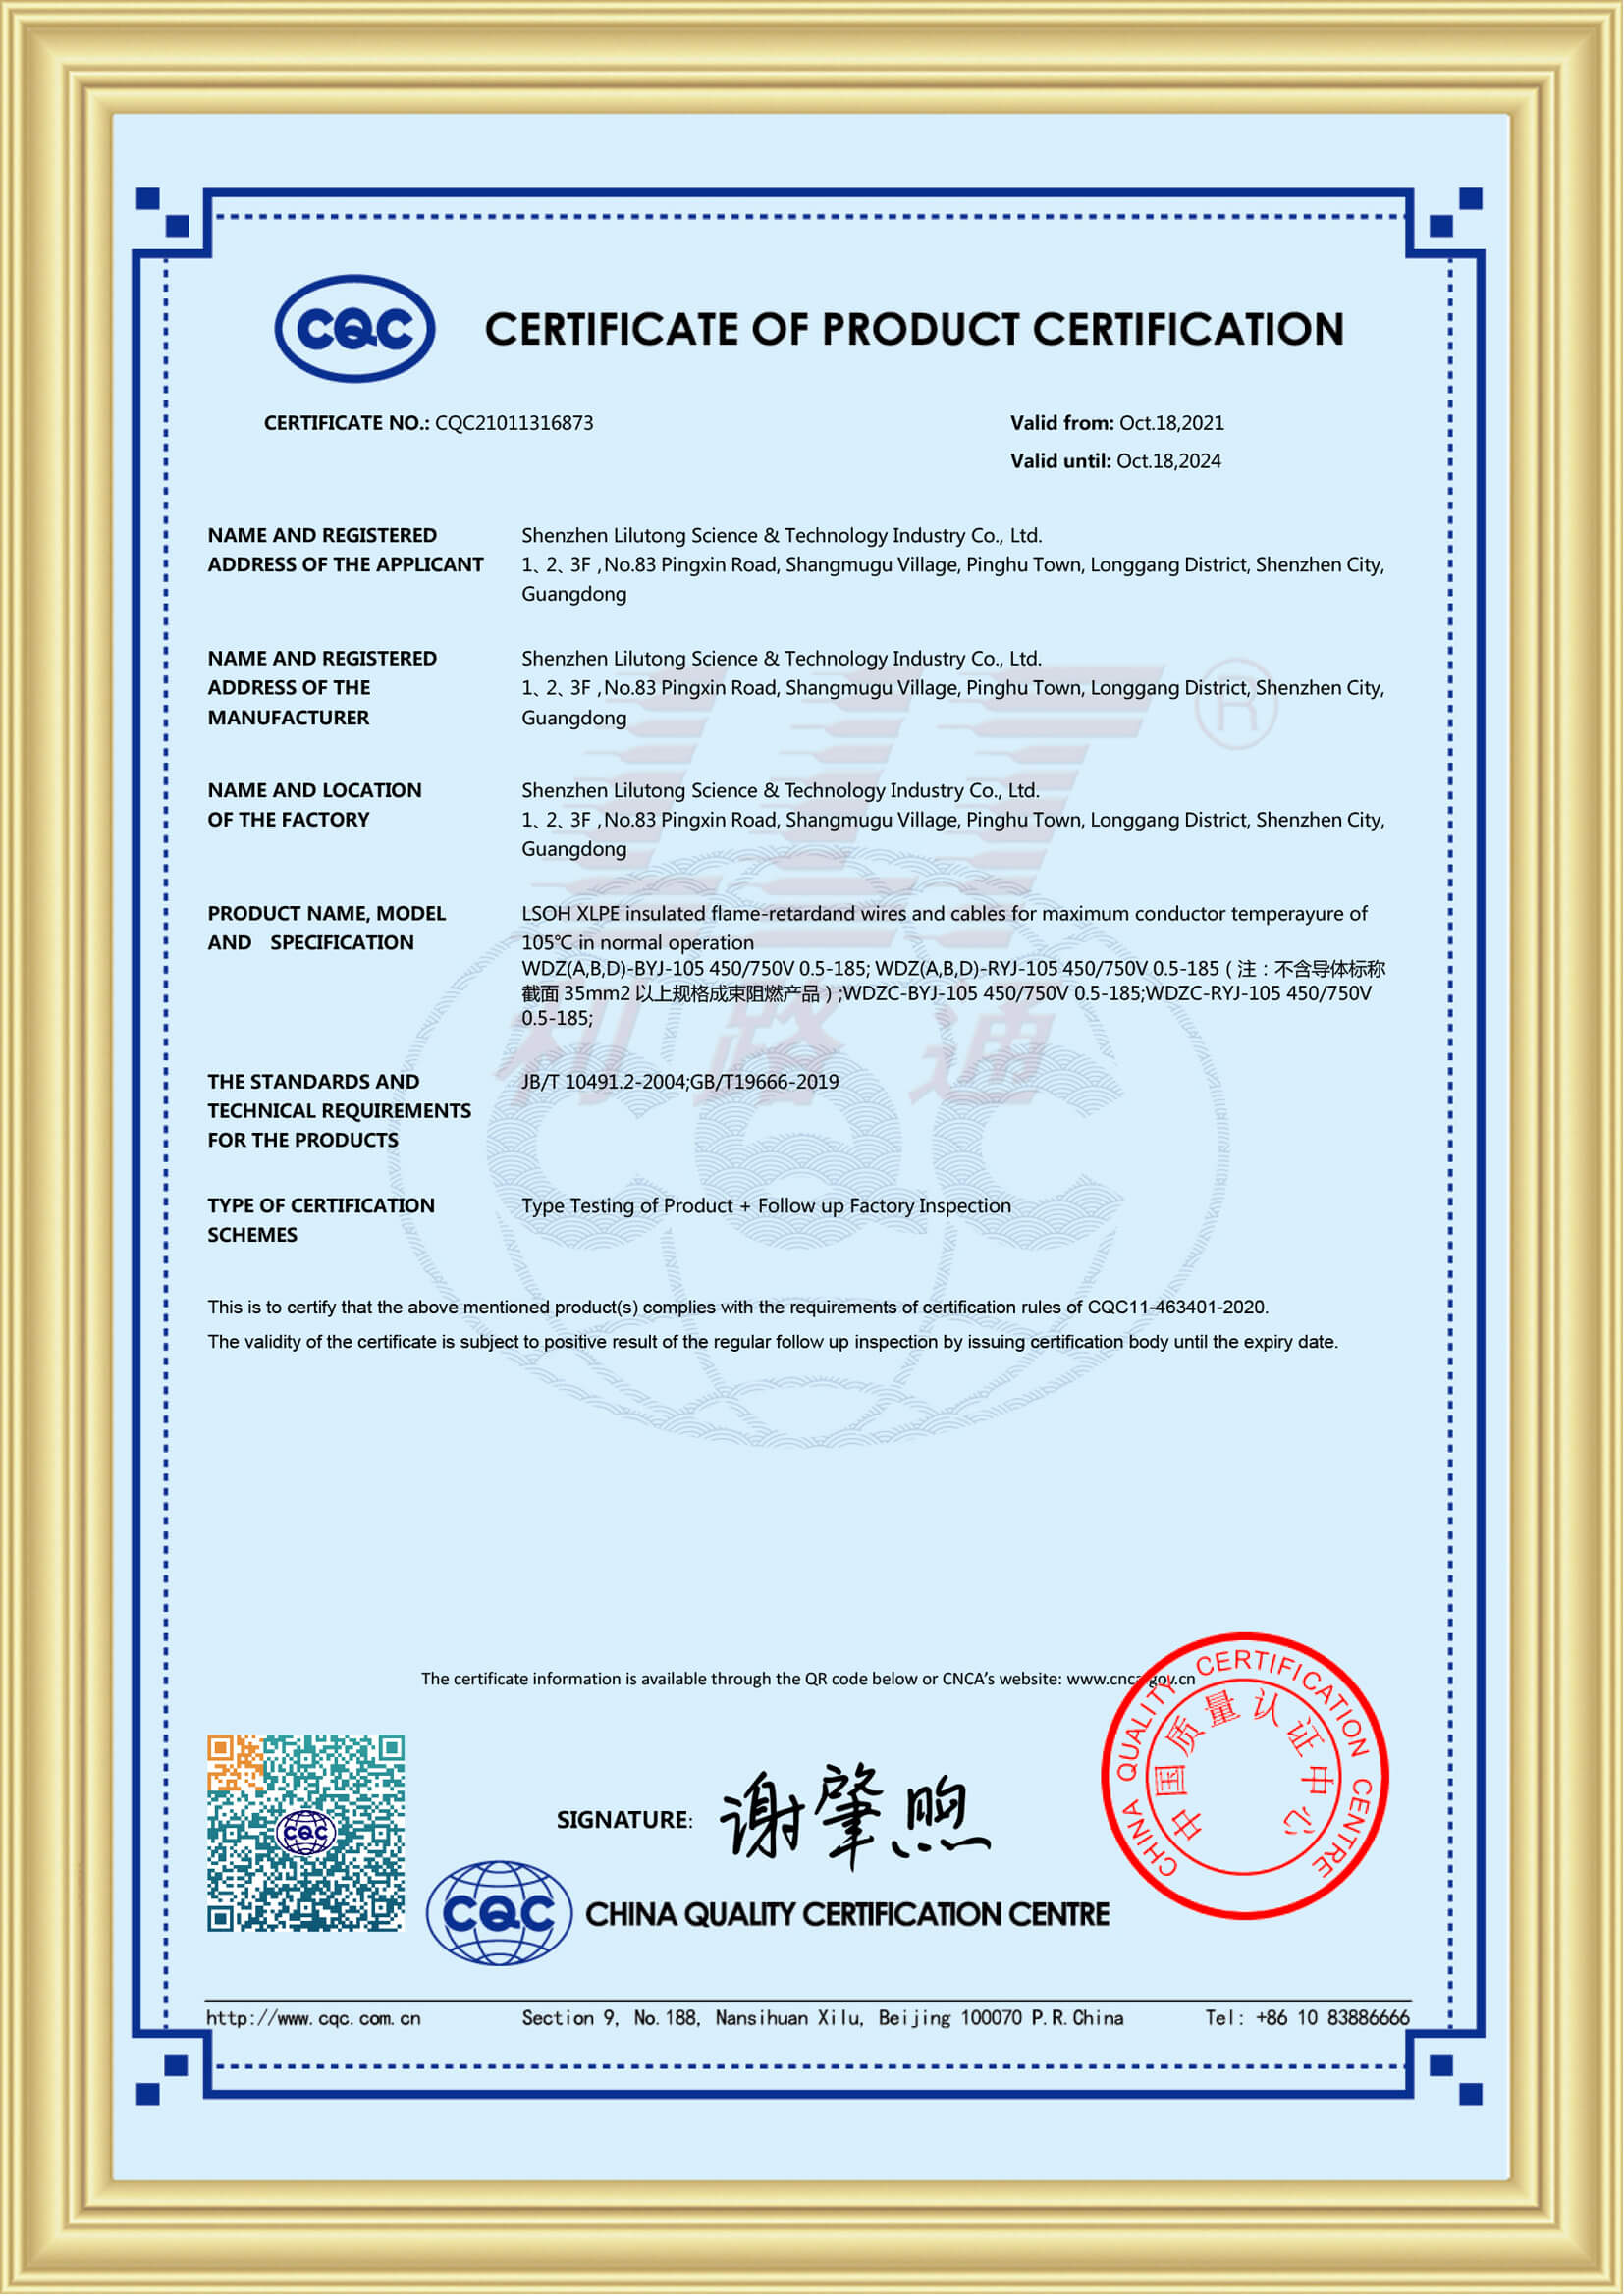 73CQC WDZ(A,B,D)-BYJ-105 Cable quality certification